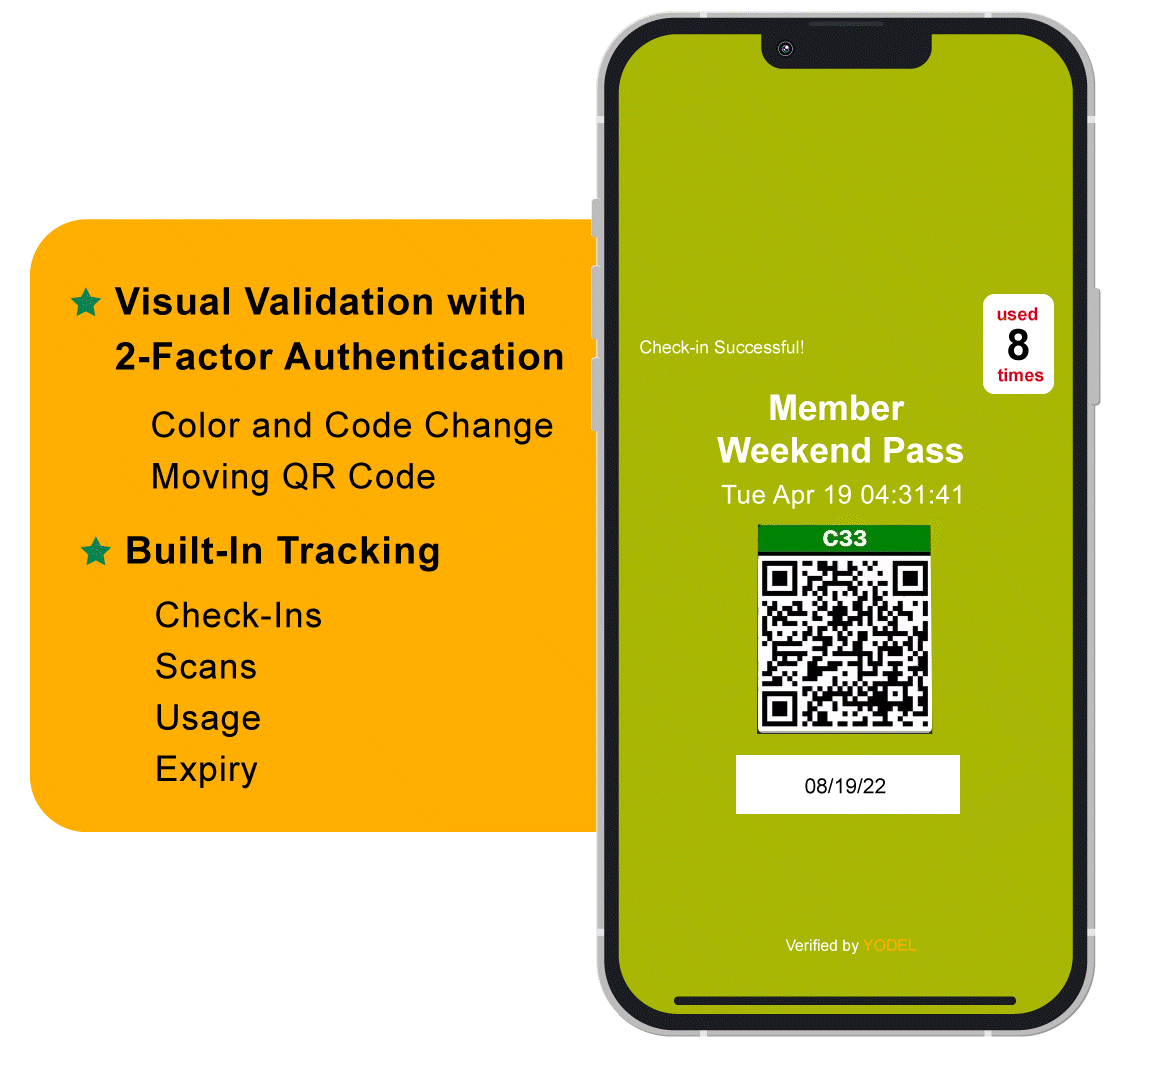 Yodel E-Card 2-factor authentication makes the pass fraud proof